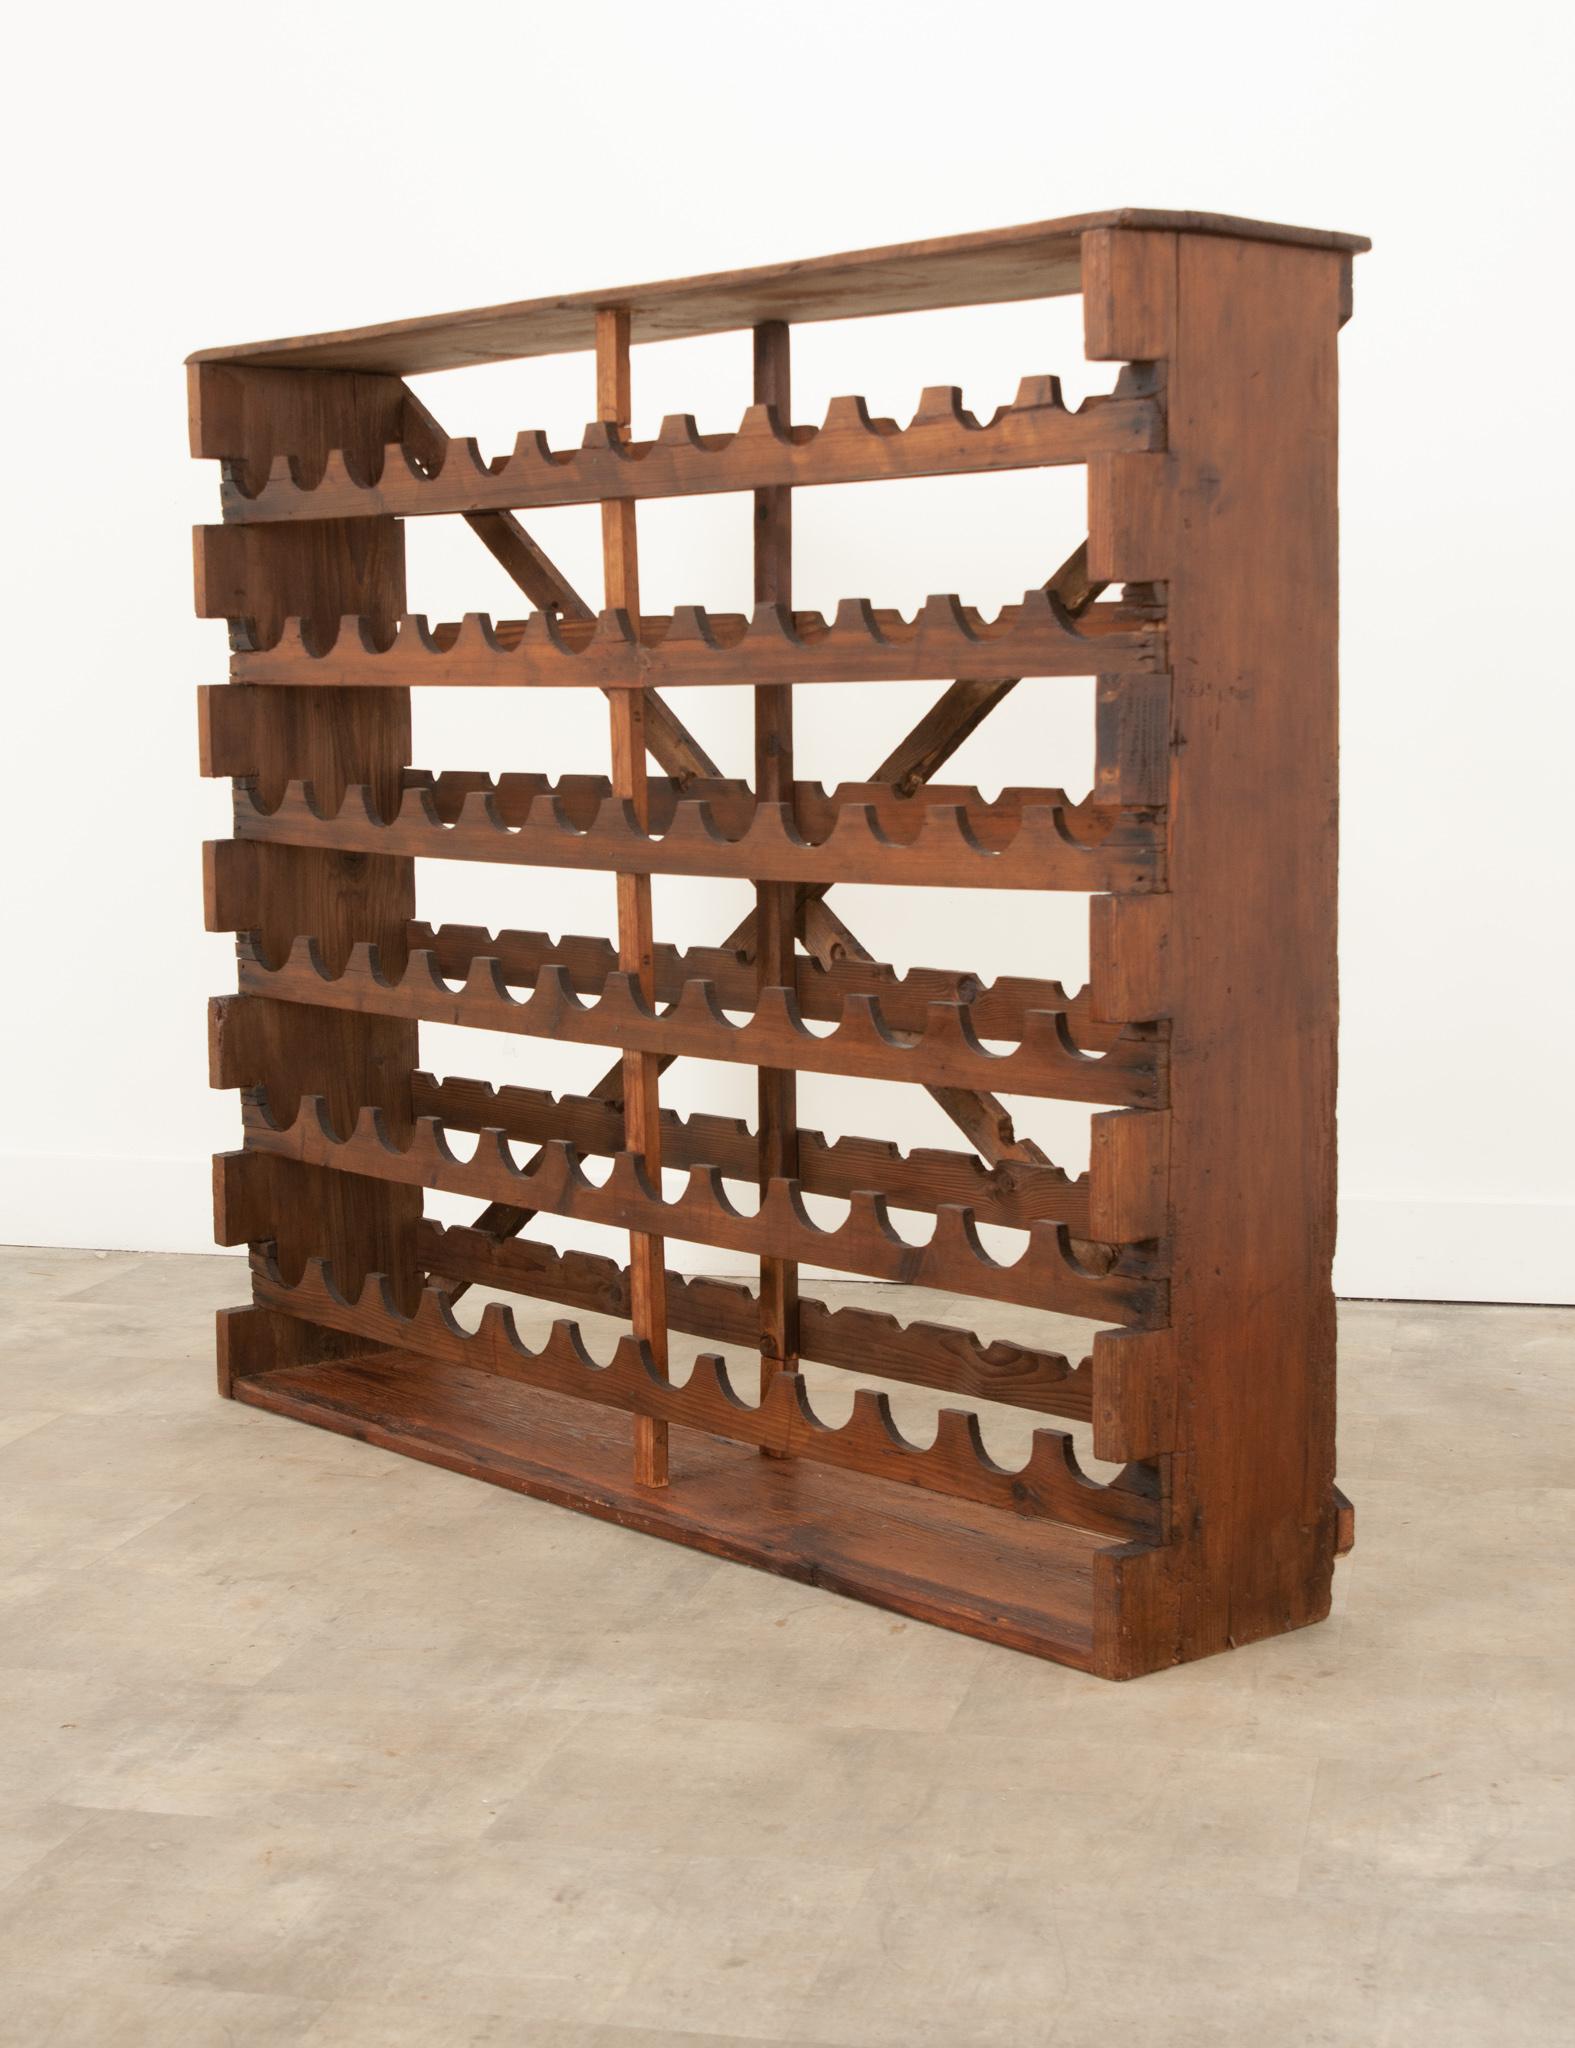 A well made vintage French standing wine bottle storage rack made of beautiful pine. A gorgeous hand-carved piece with a highly functional design that is perfect for storing and displaying wine bottles horizontally in order to preserve the cork. The